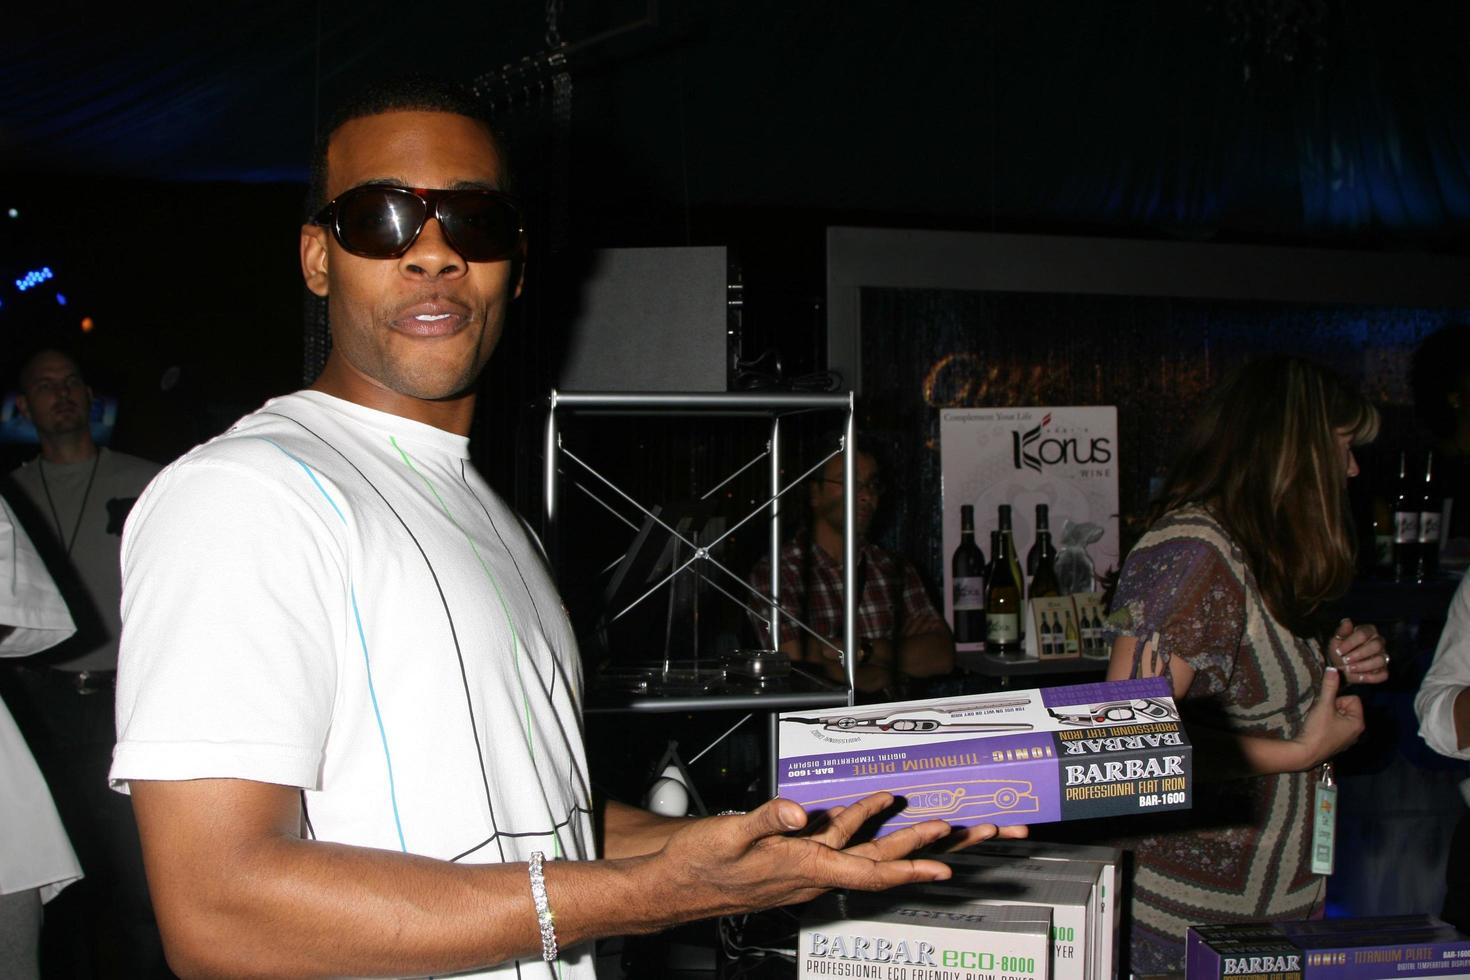 Mario at the BET Awards GBK Gifting Lounge outside the Shrine Auditorium in Los Angeles CA onJune 23 20082008 photo